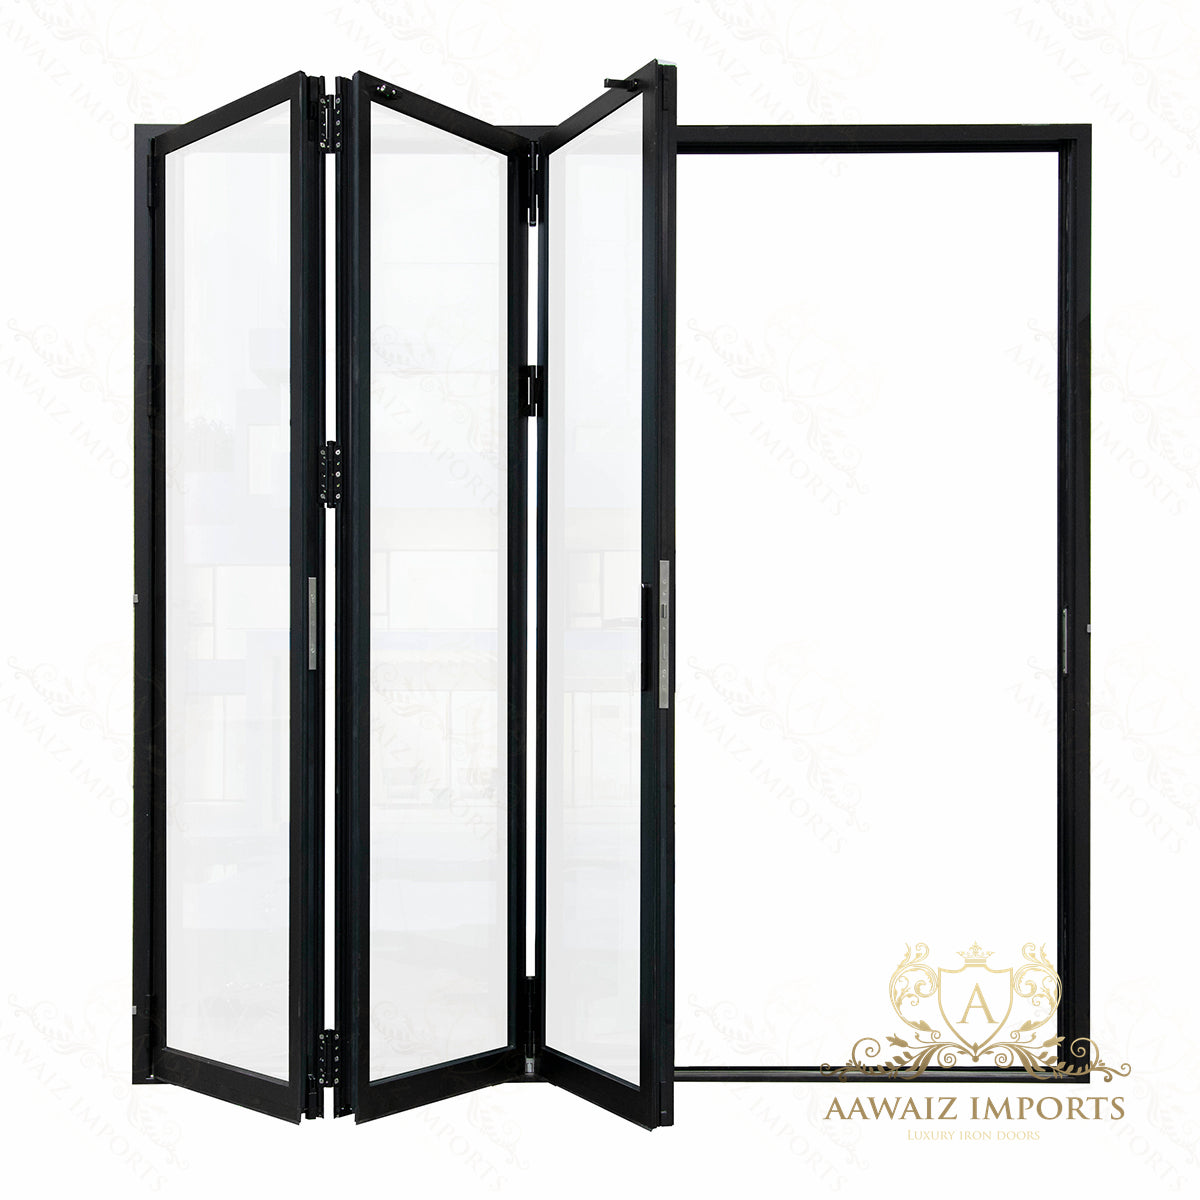 9 Ft Wide By 7 Ft Tall (108" By 84") Aluminum Bi Fold Patio Door Outswing  Thermal Break Insulated Matt Black Finish